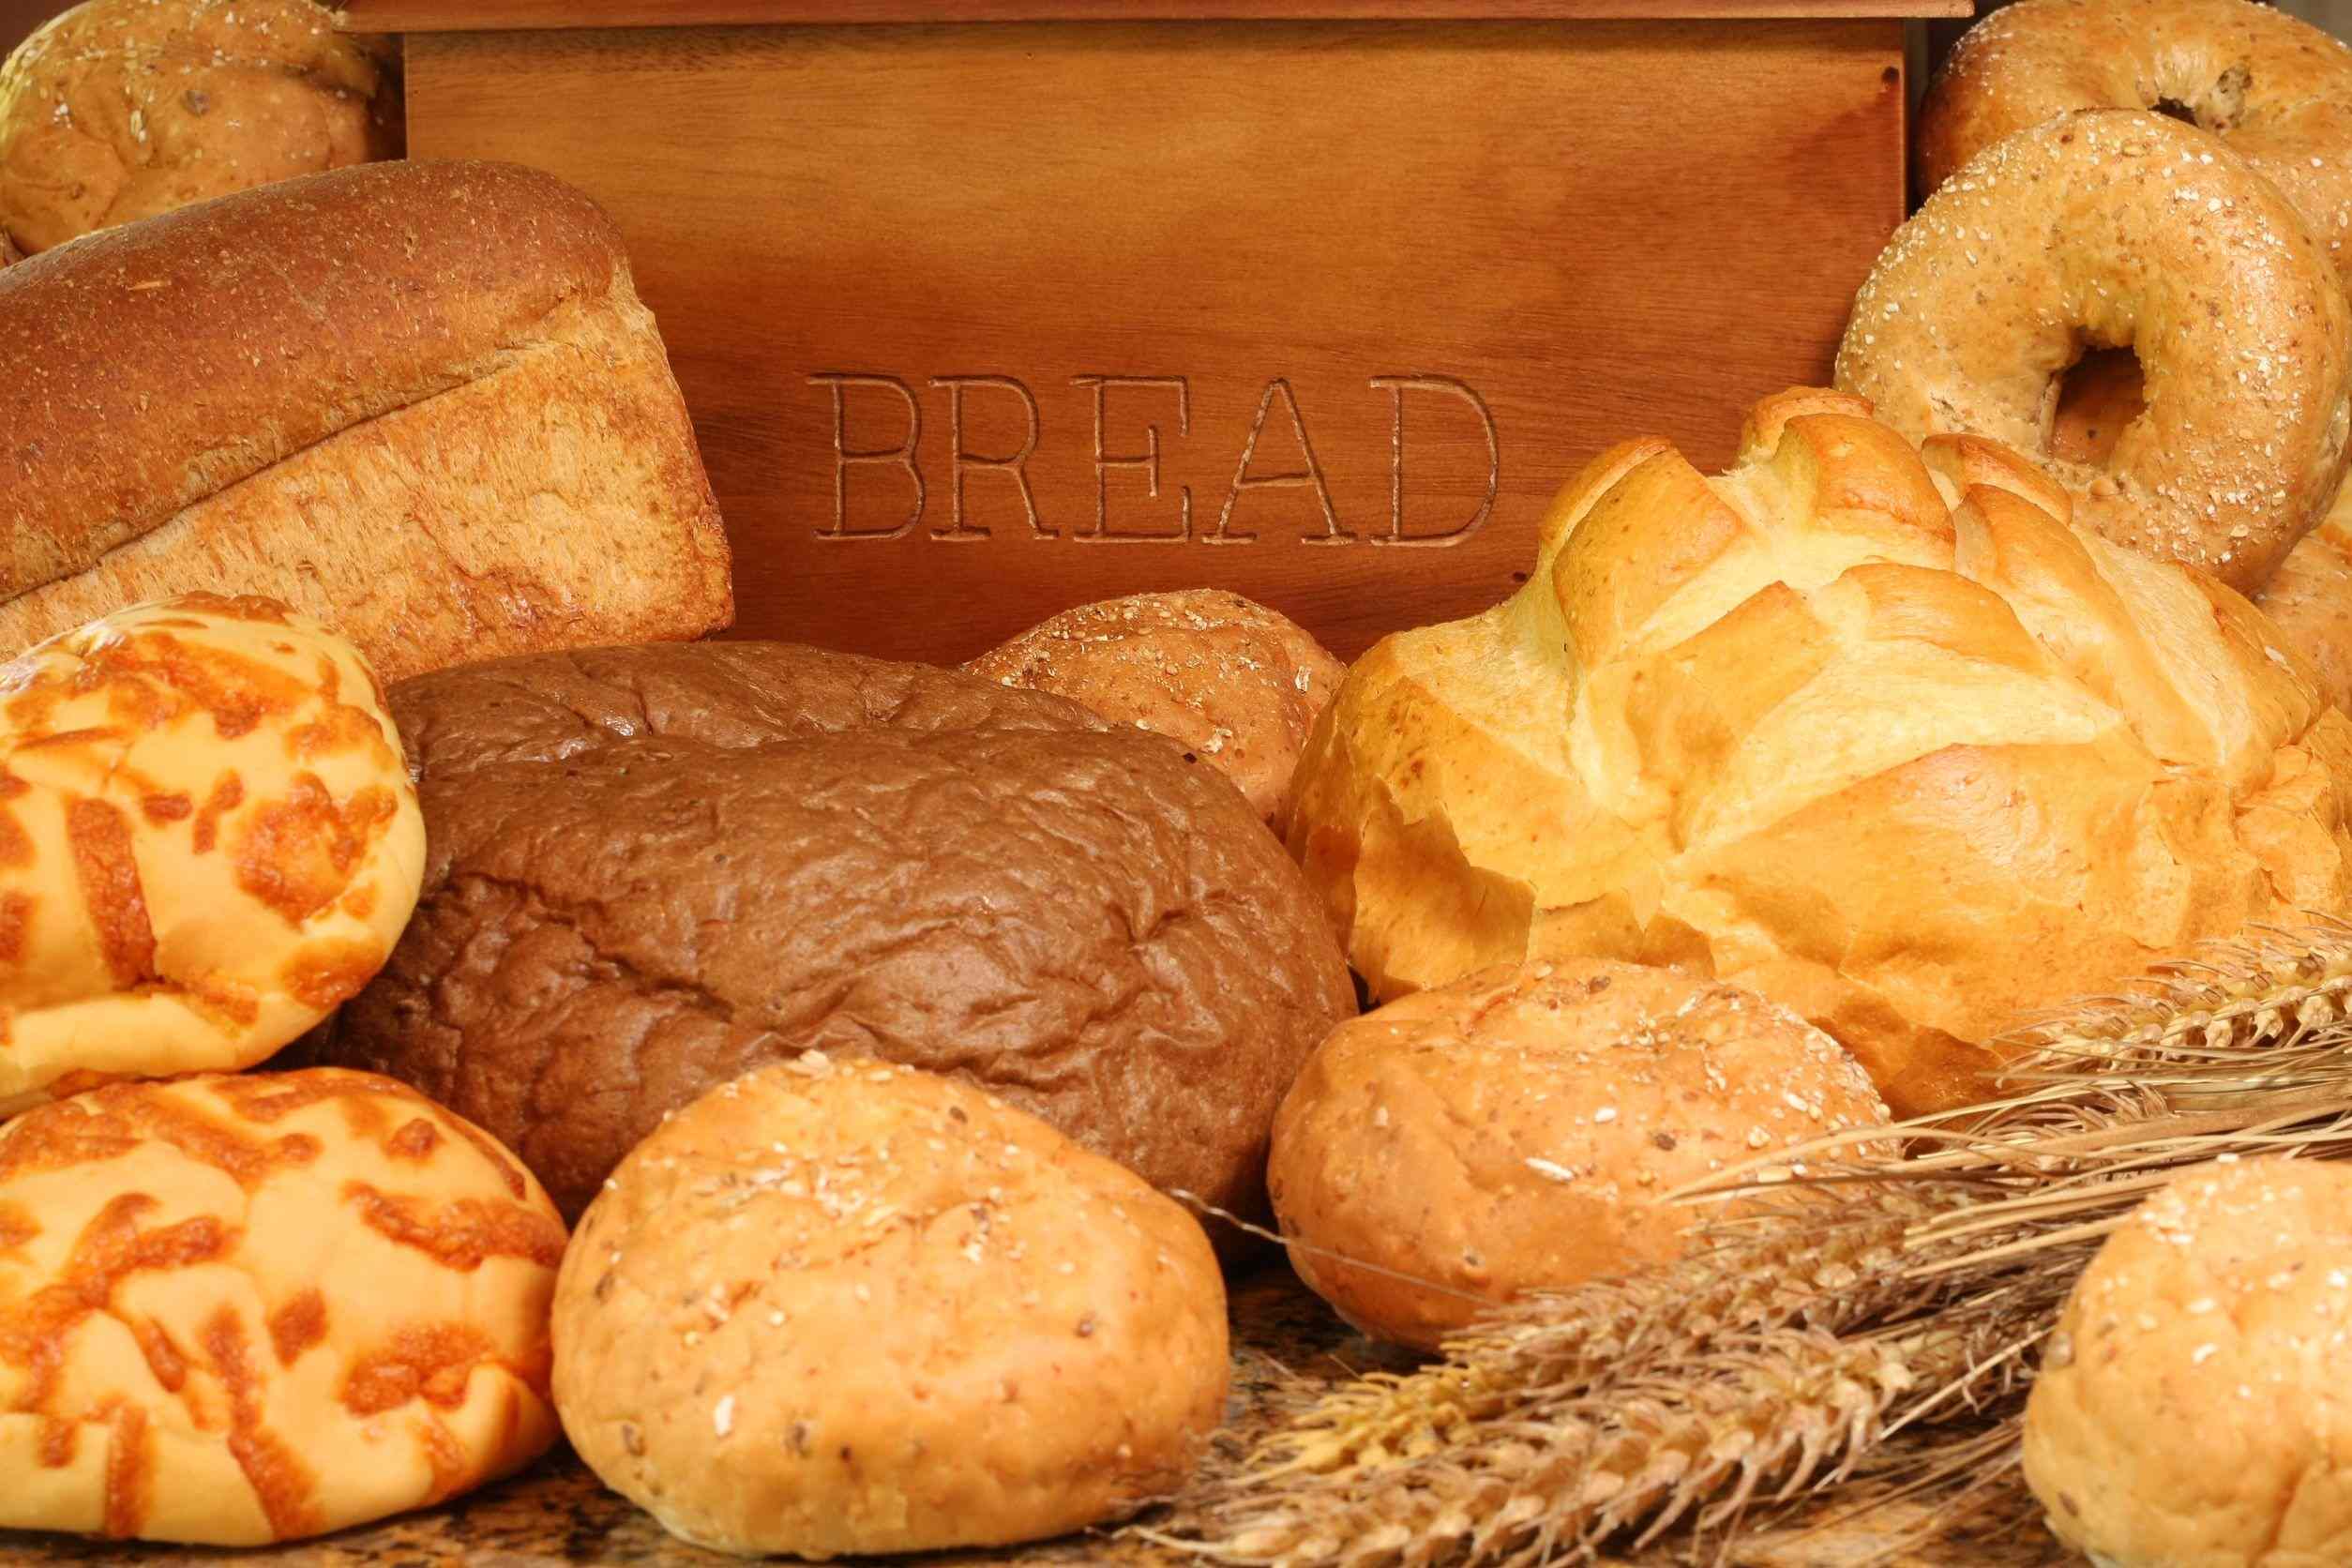 commercially baked breads.